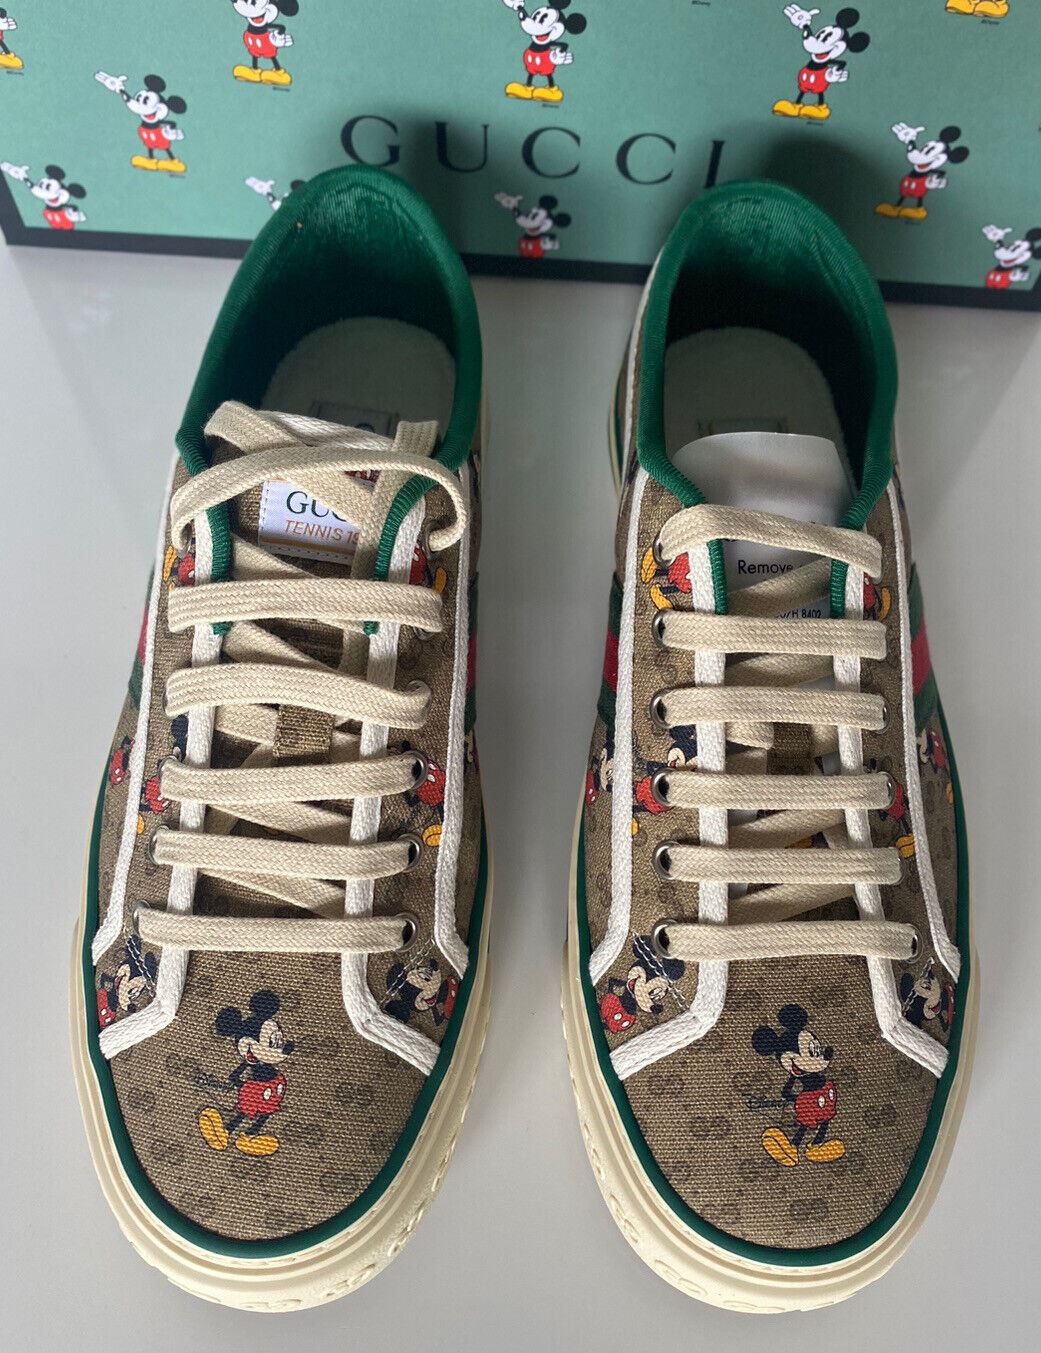 NIB Gucci Men’s Mickey Mouse Sneakers 10.5 US (Gucci 10) Made in Italy 606111